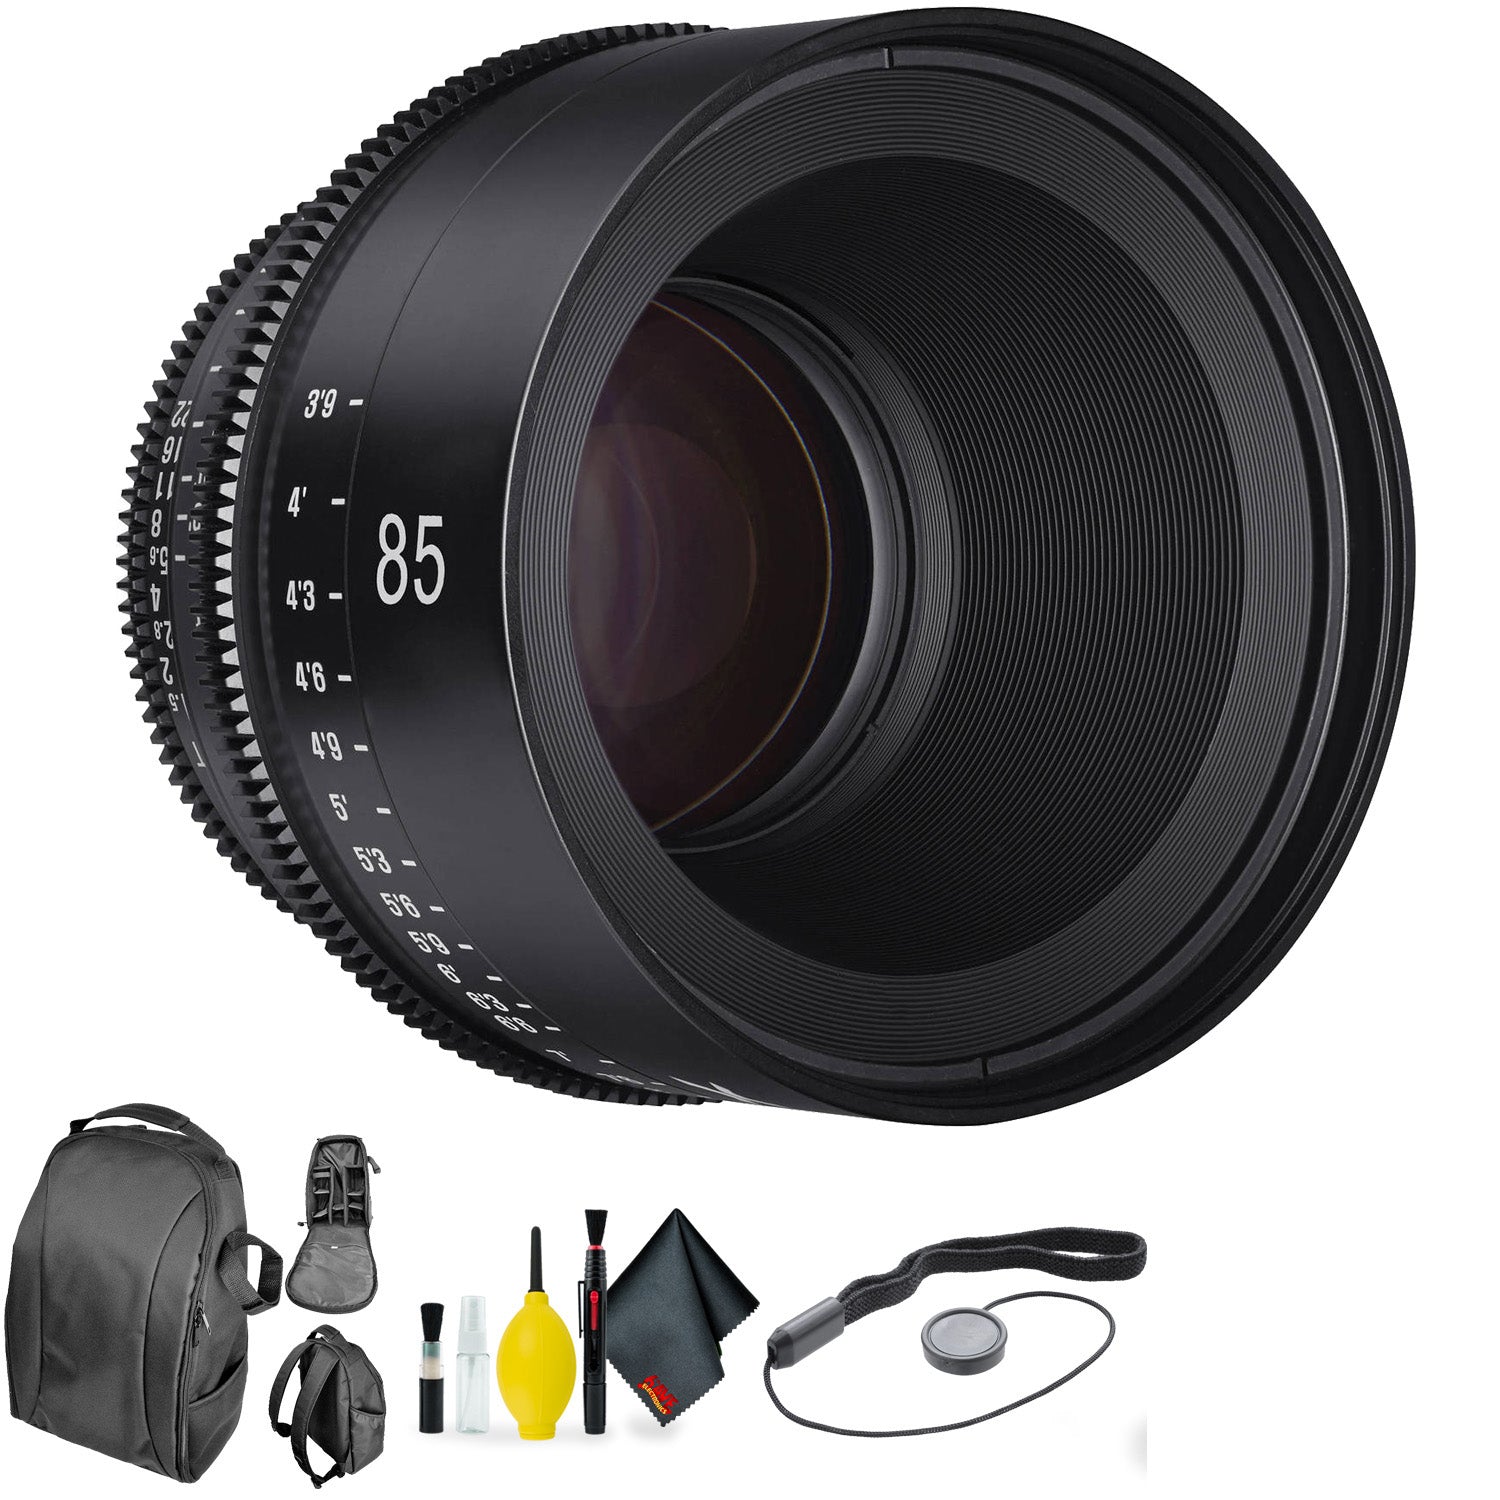 Xeen by Rokinon 85mm T1.5 for PL + Deluxe Lens Cleaning Kit Bundle